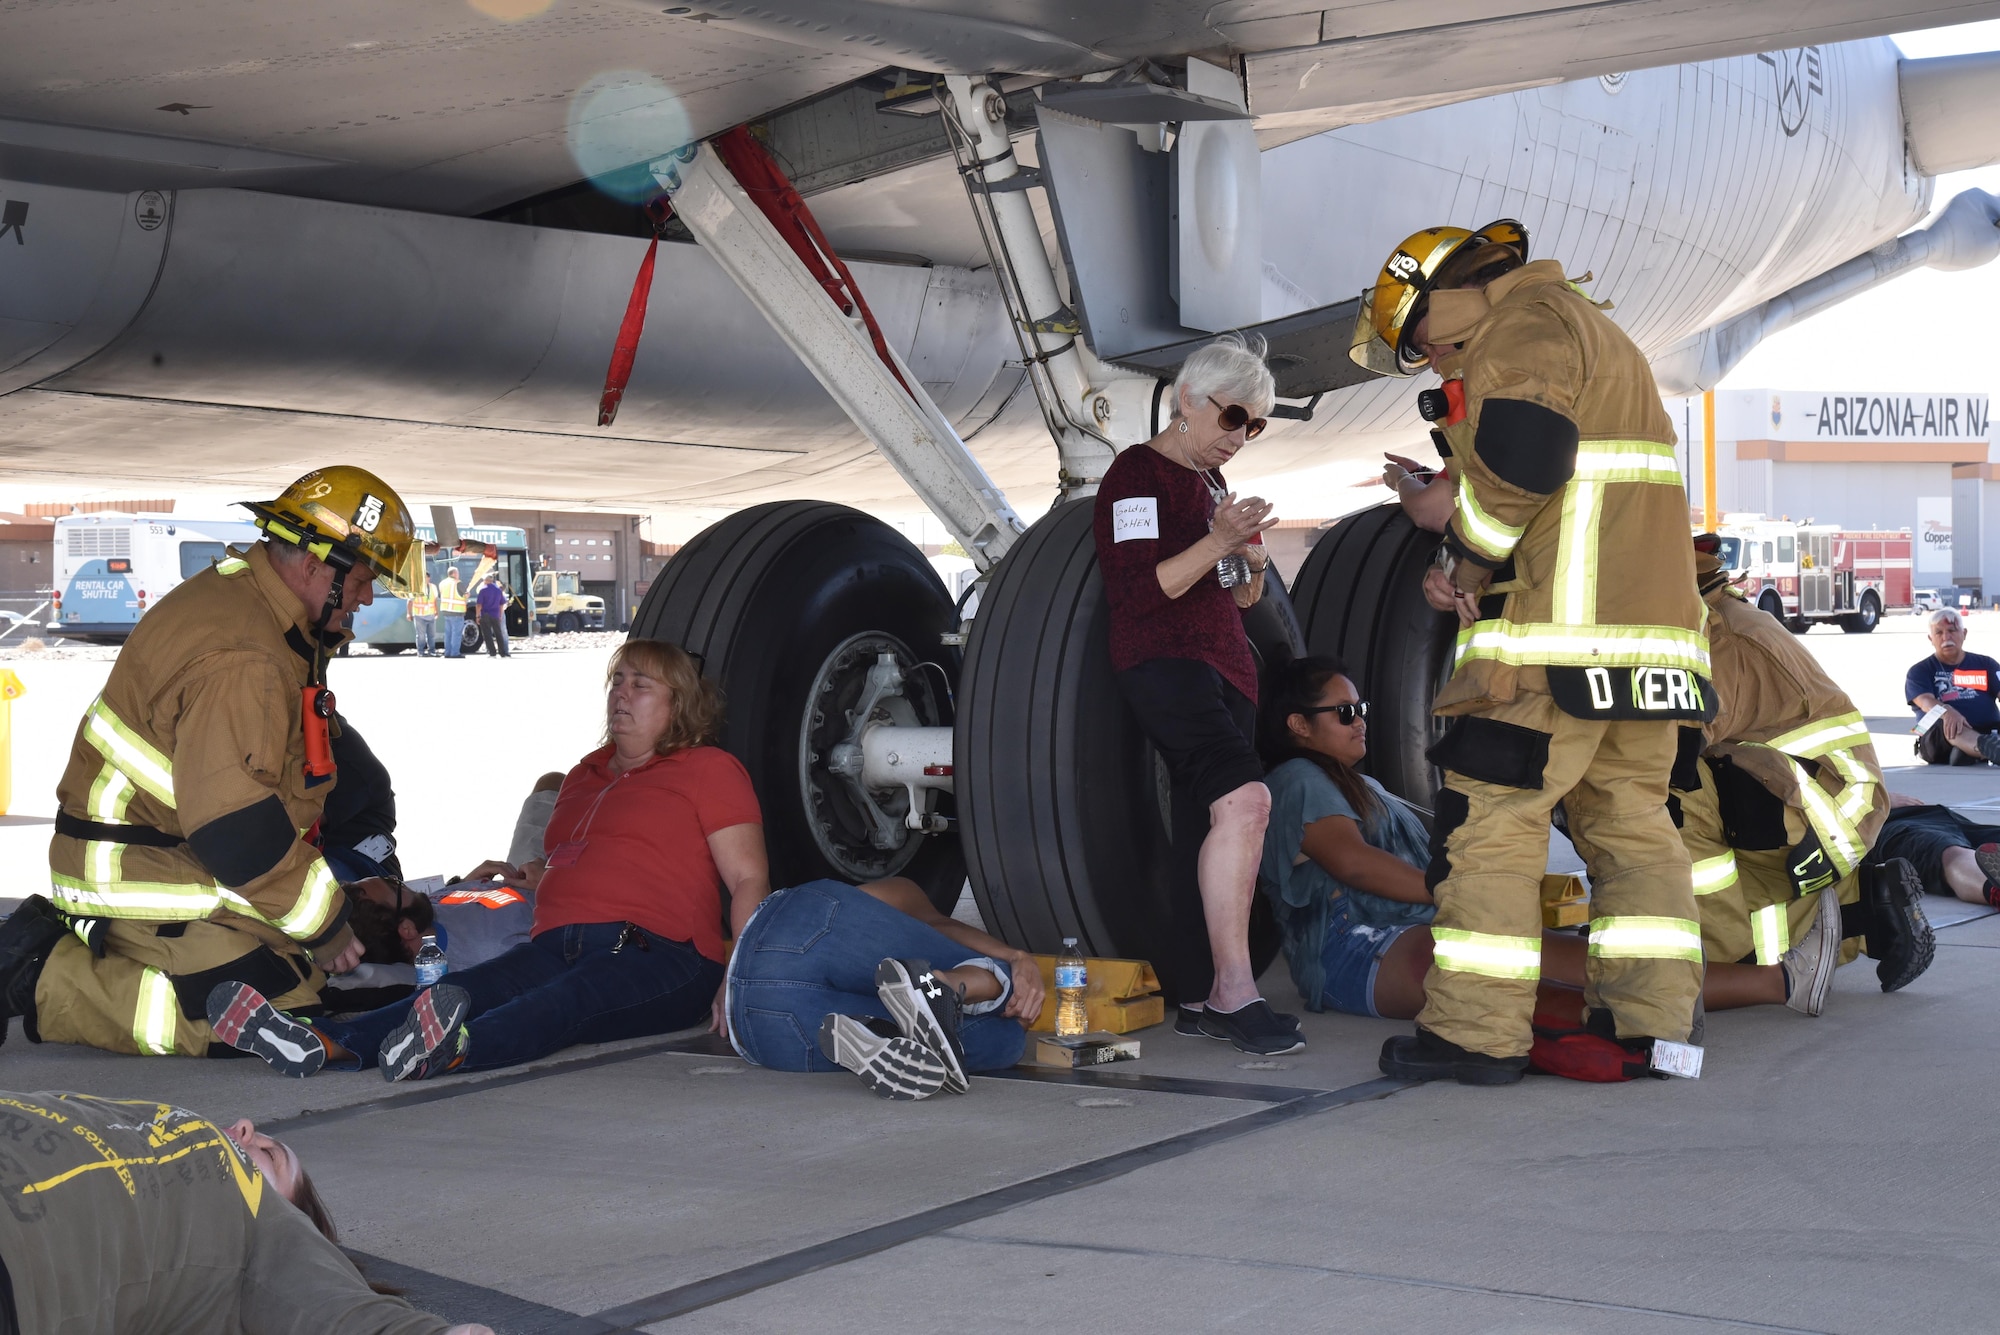 Firemen rush to the aid of passengers immediately after a fictitiously-crashed aircraft here, during the 2017 Triennial Exercise, 26 Oct. 2017. The exercise occurs every three years and the Air Guard participates as one of the partners. (U.S. Air Force photo by 2nd Lt. Tinashe Machona)